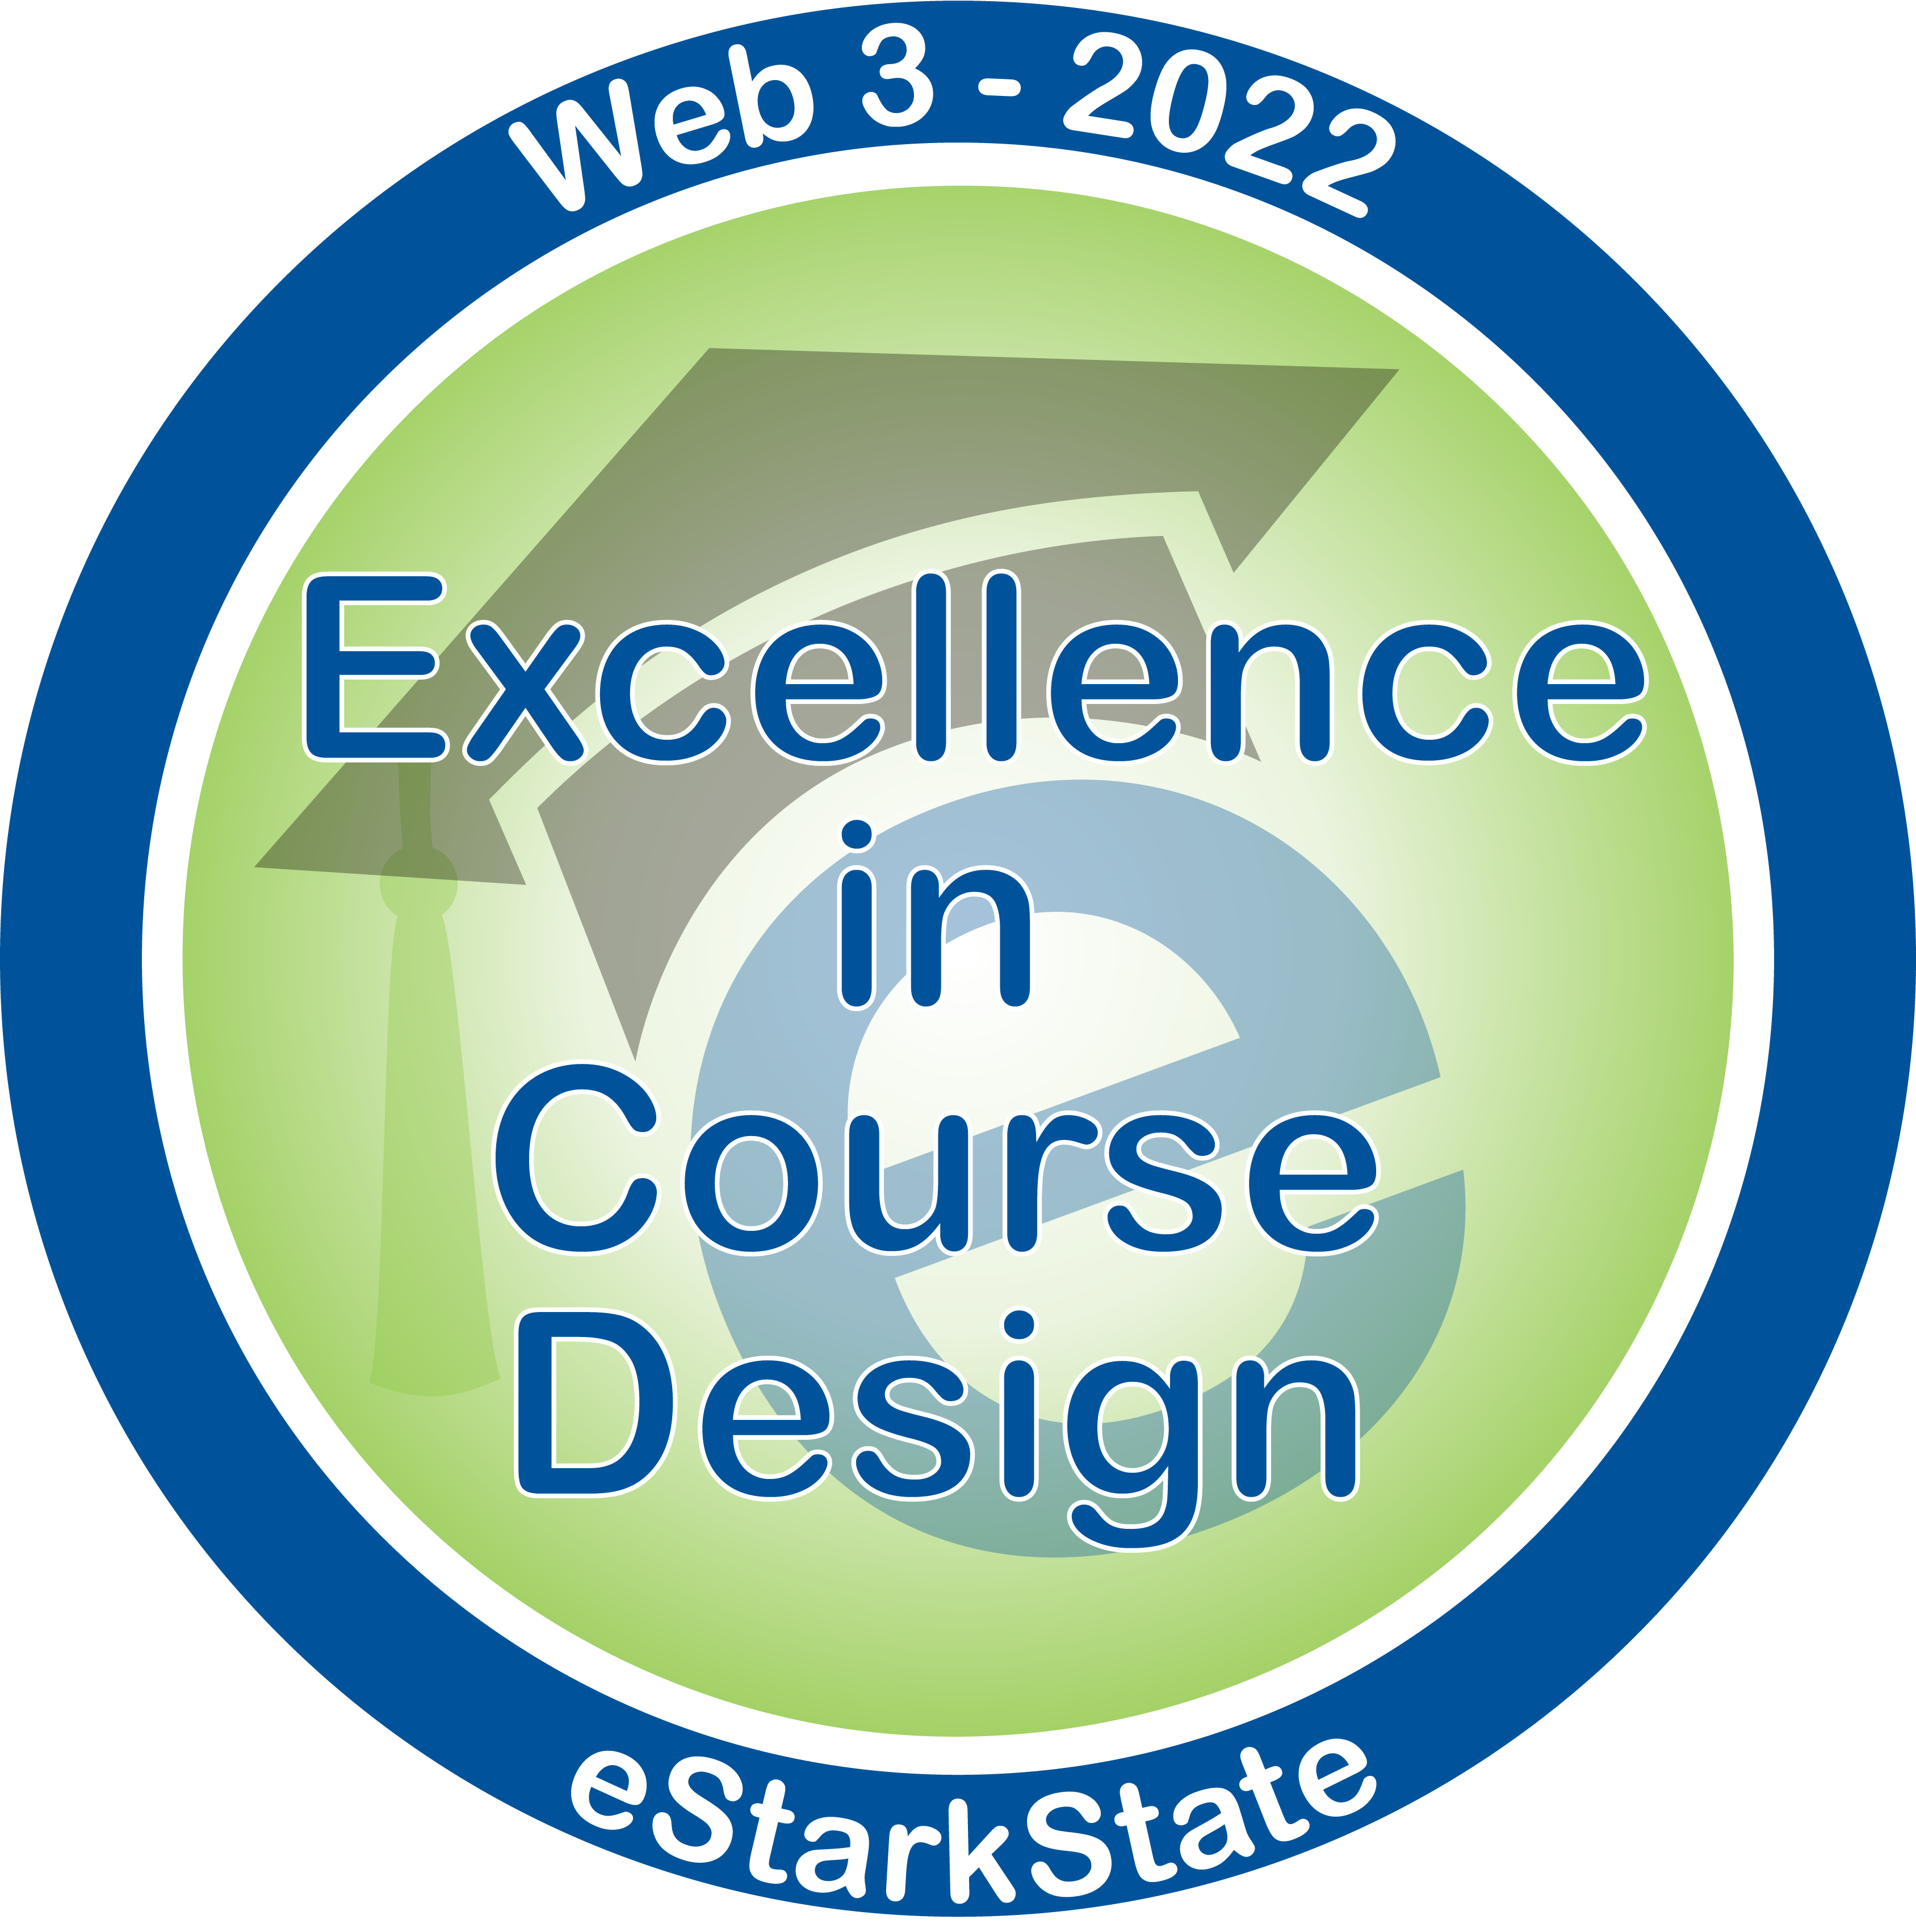 Excellence in Course Design - Web 3 - 2022